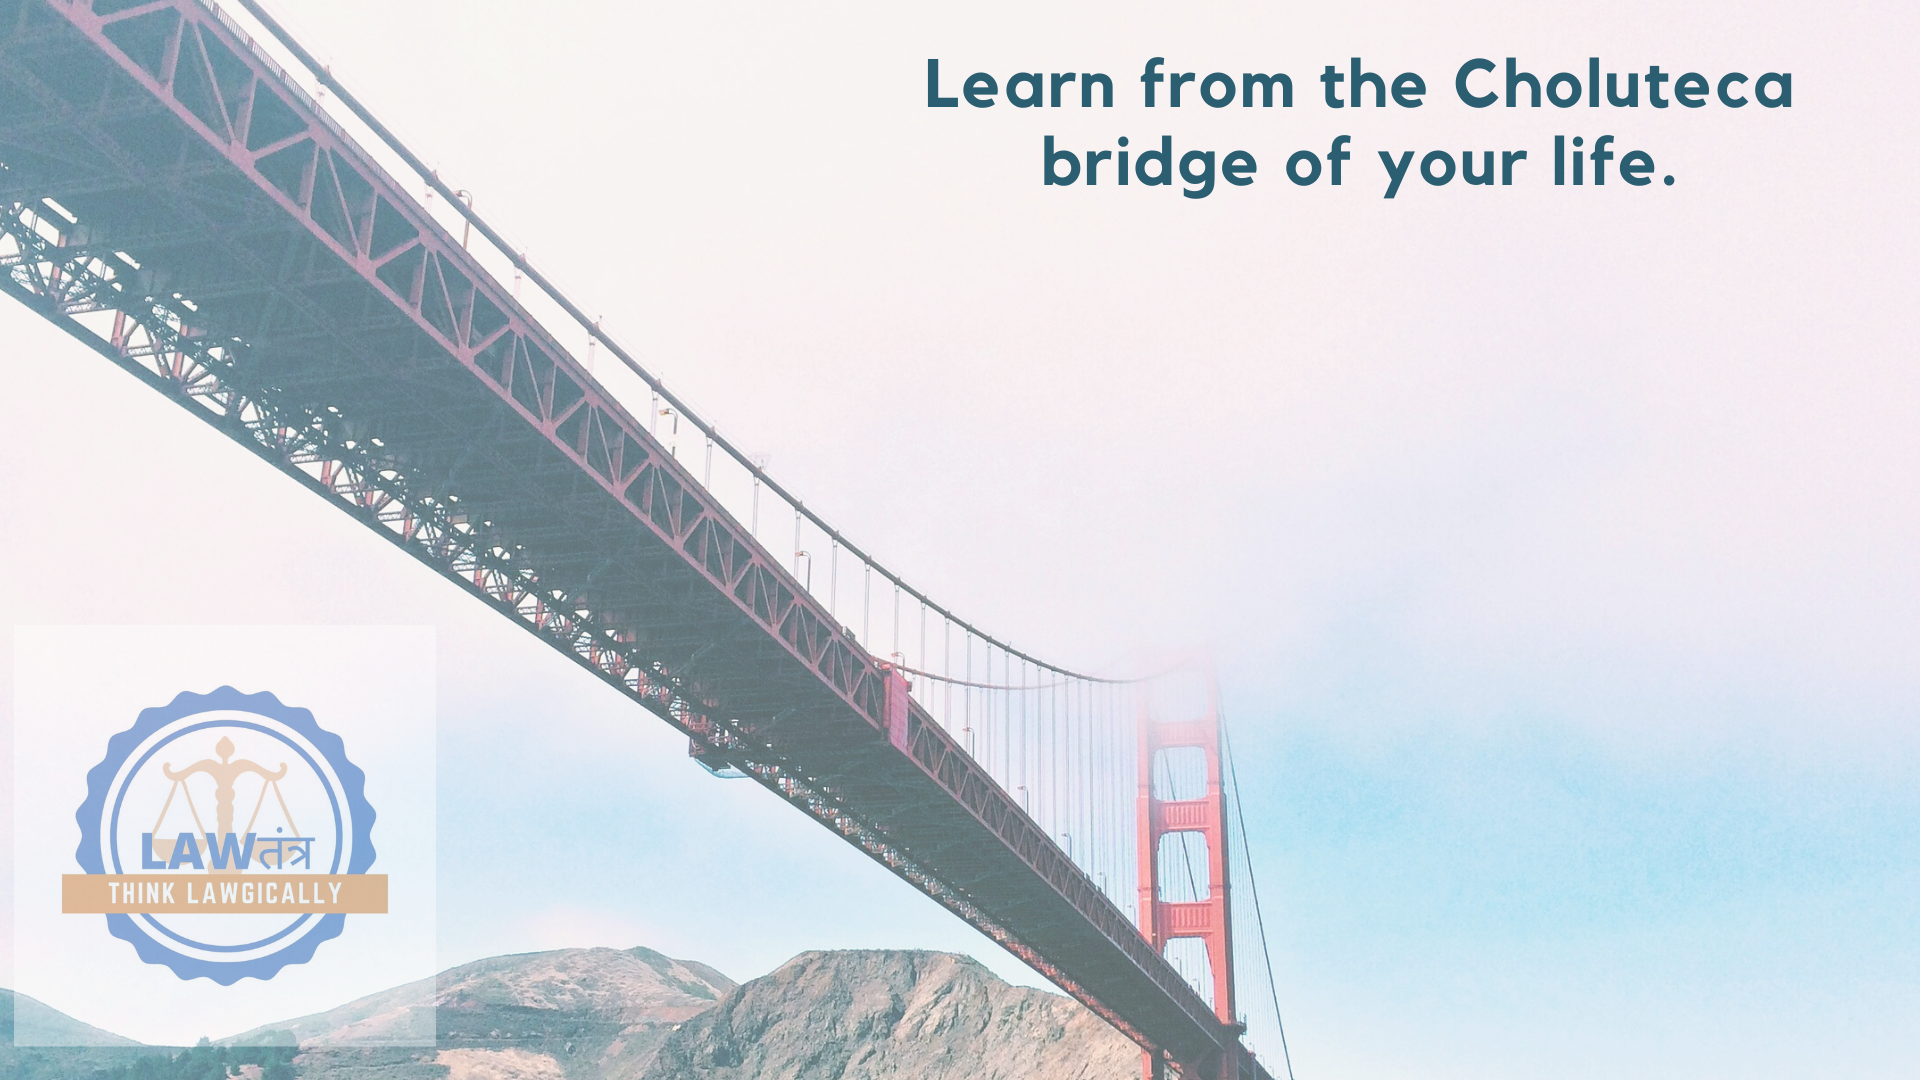 Learn from the Choluteca Bridge of your life: Image